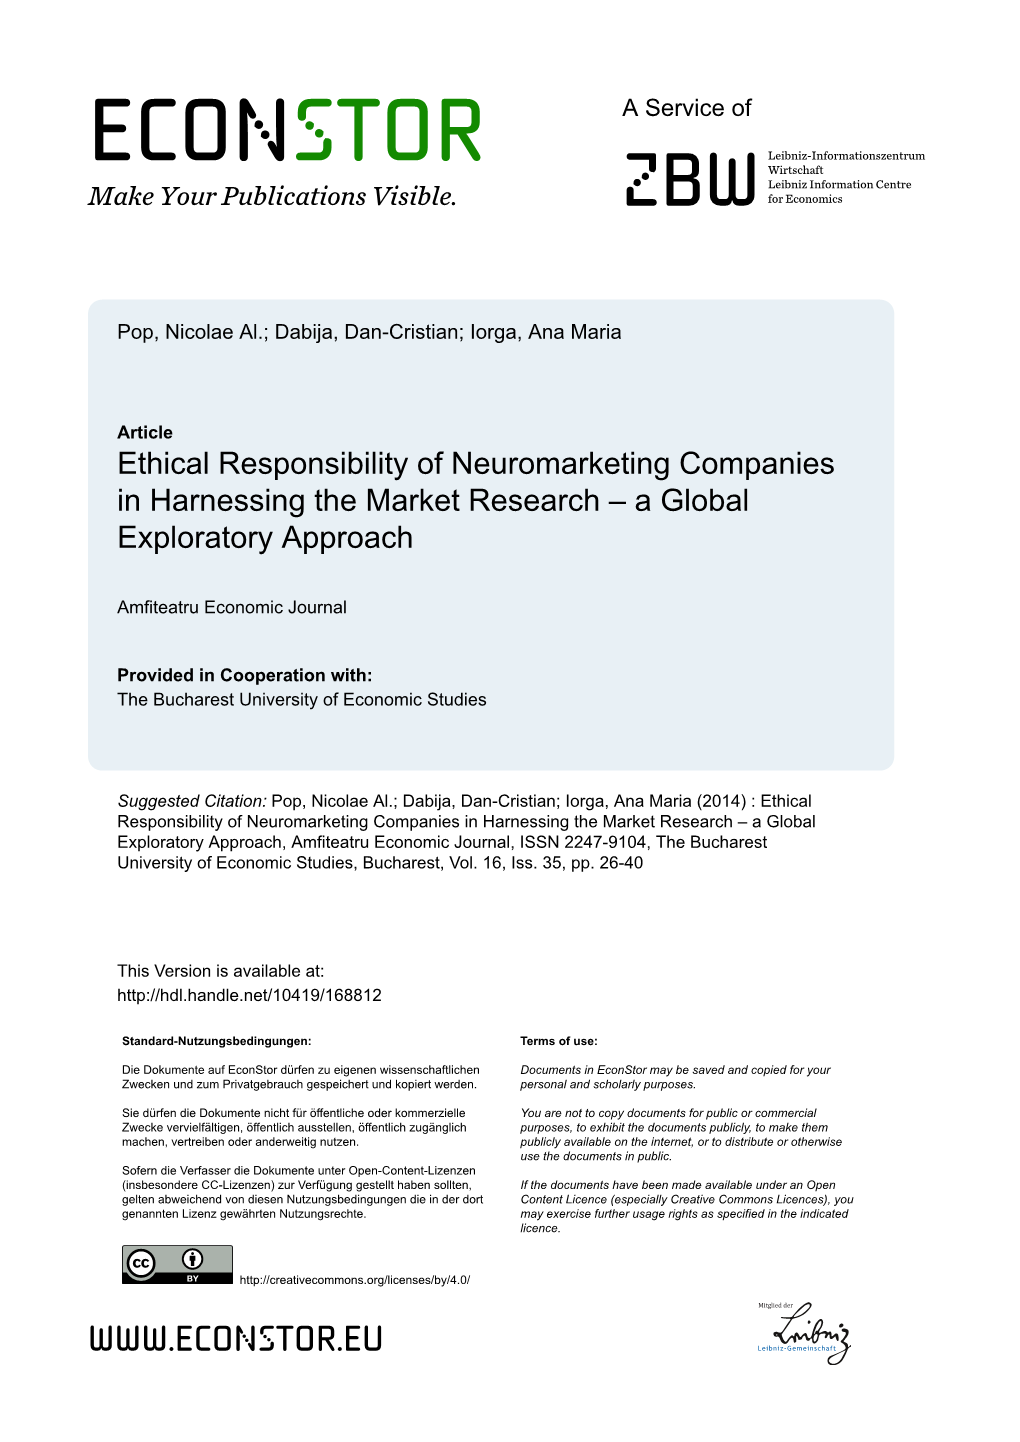 Ethical Responsibility of Neuromarketing Companies in Harnessing the Market Research – a Global Exploratory Approach